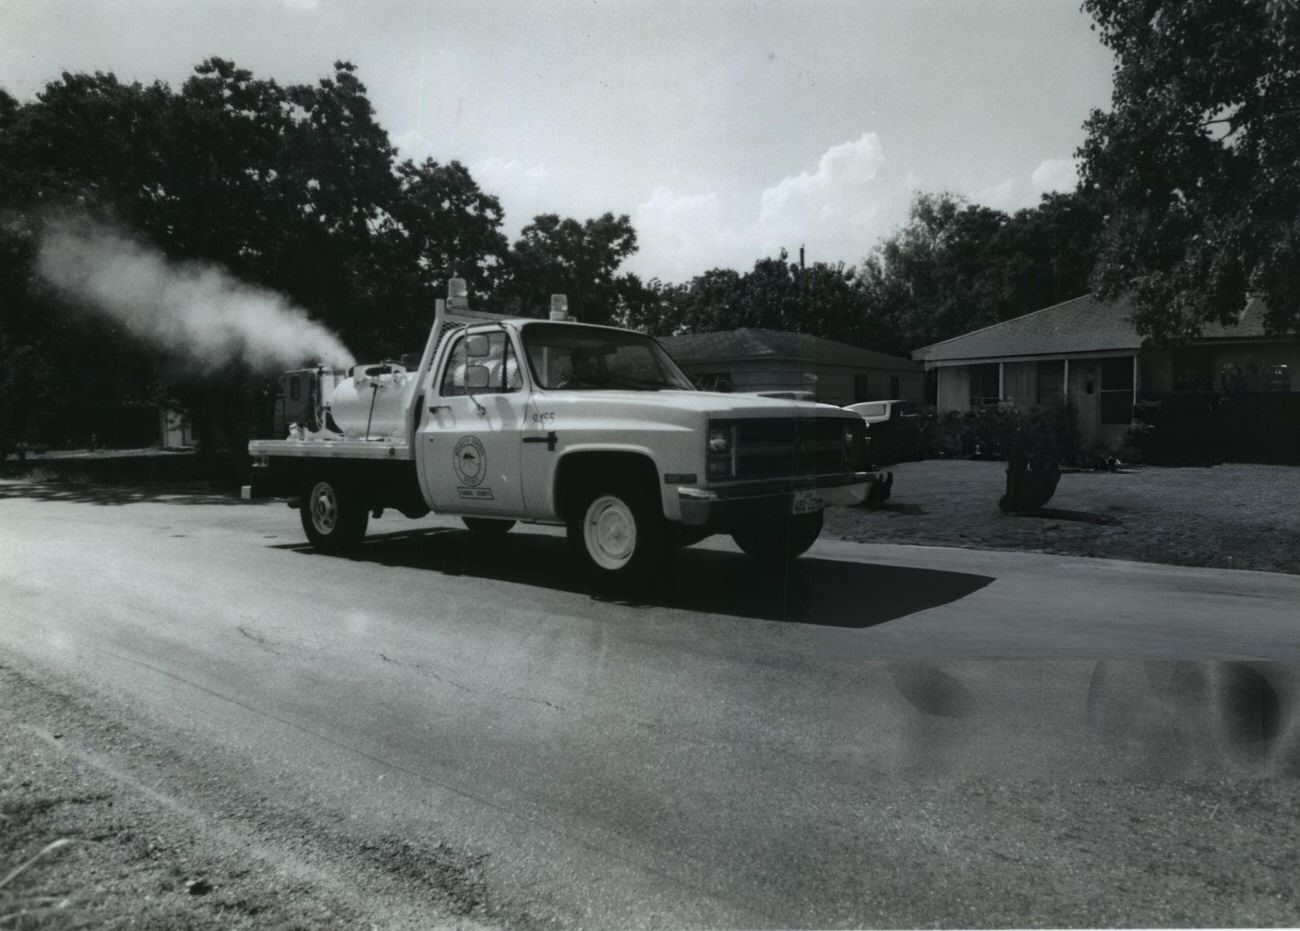 Sidney Pennie sprays insecticide in a Houston suburb following floods, as part of the Harris County Mosquito Control District's efforts.